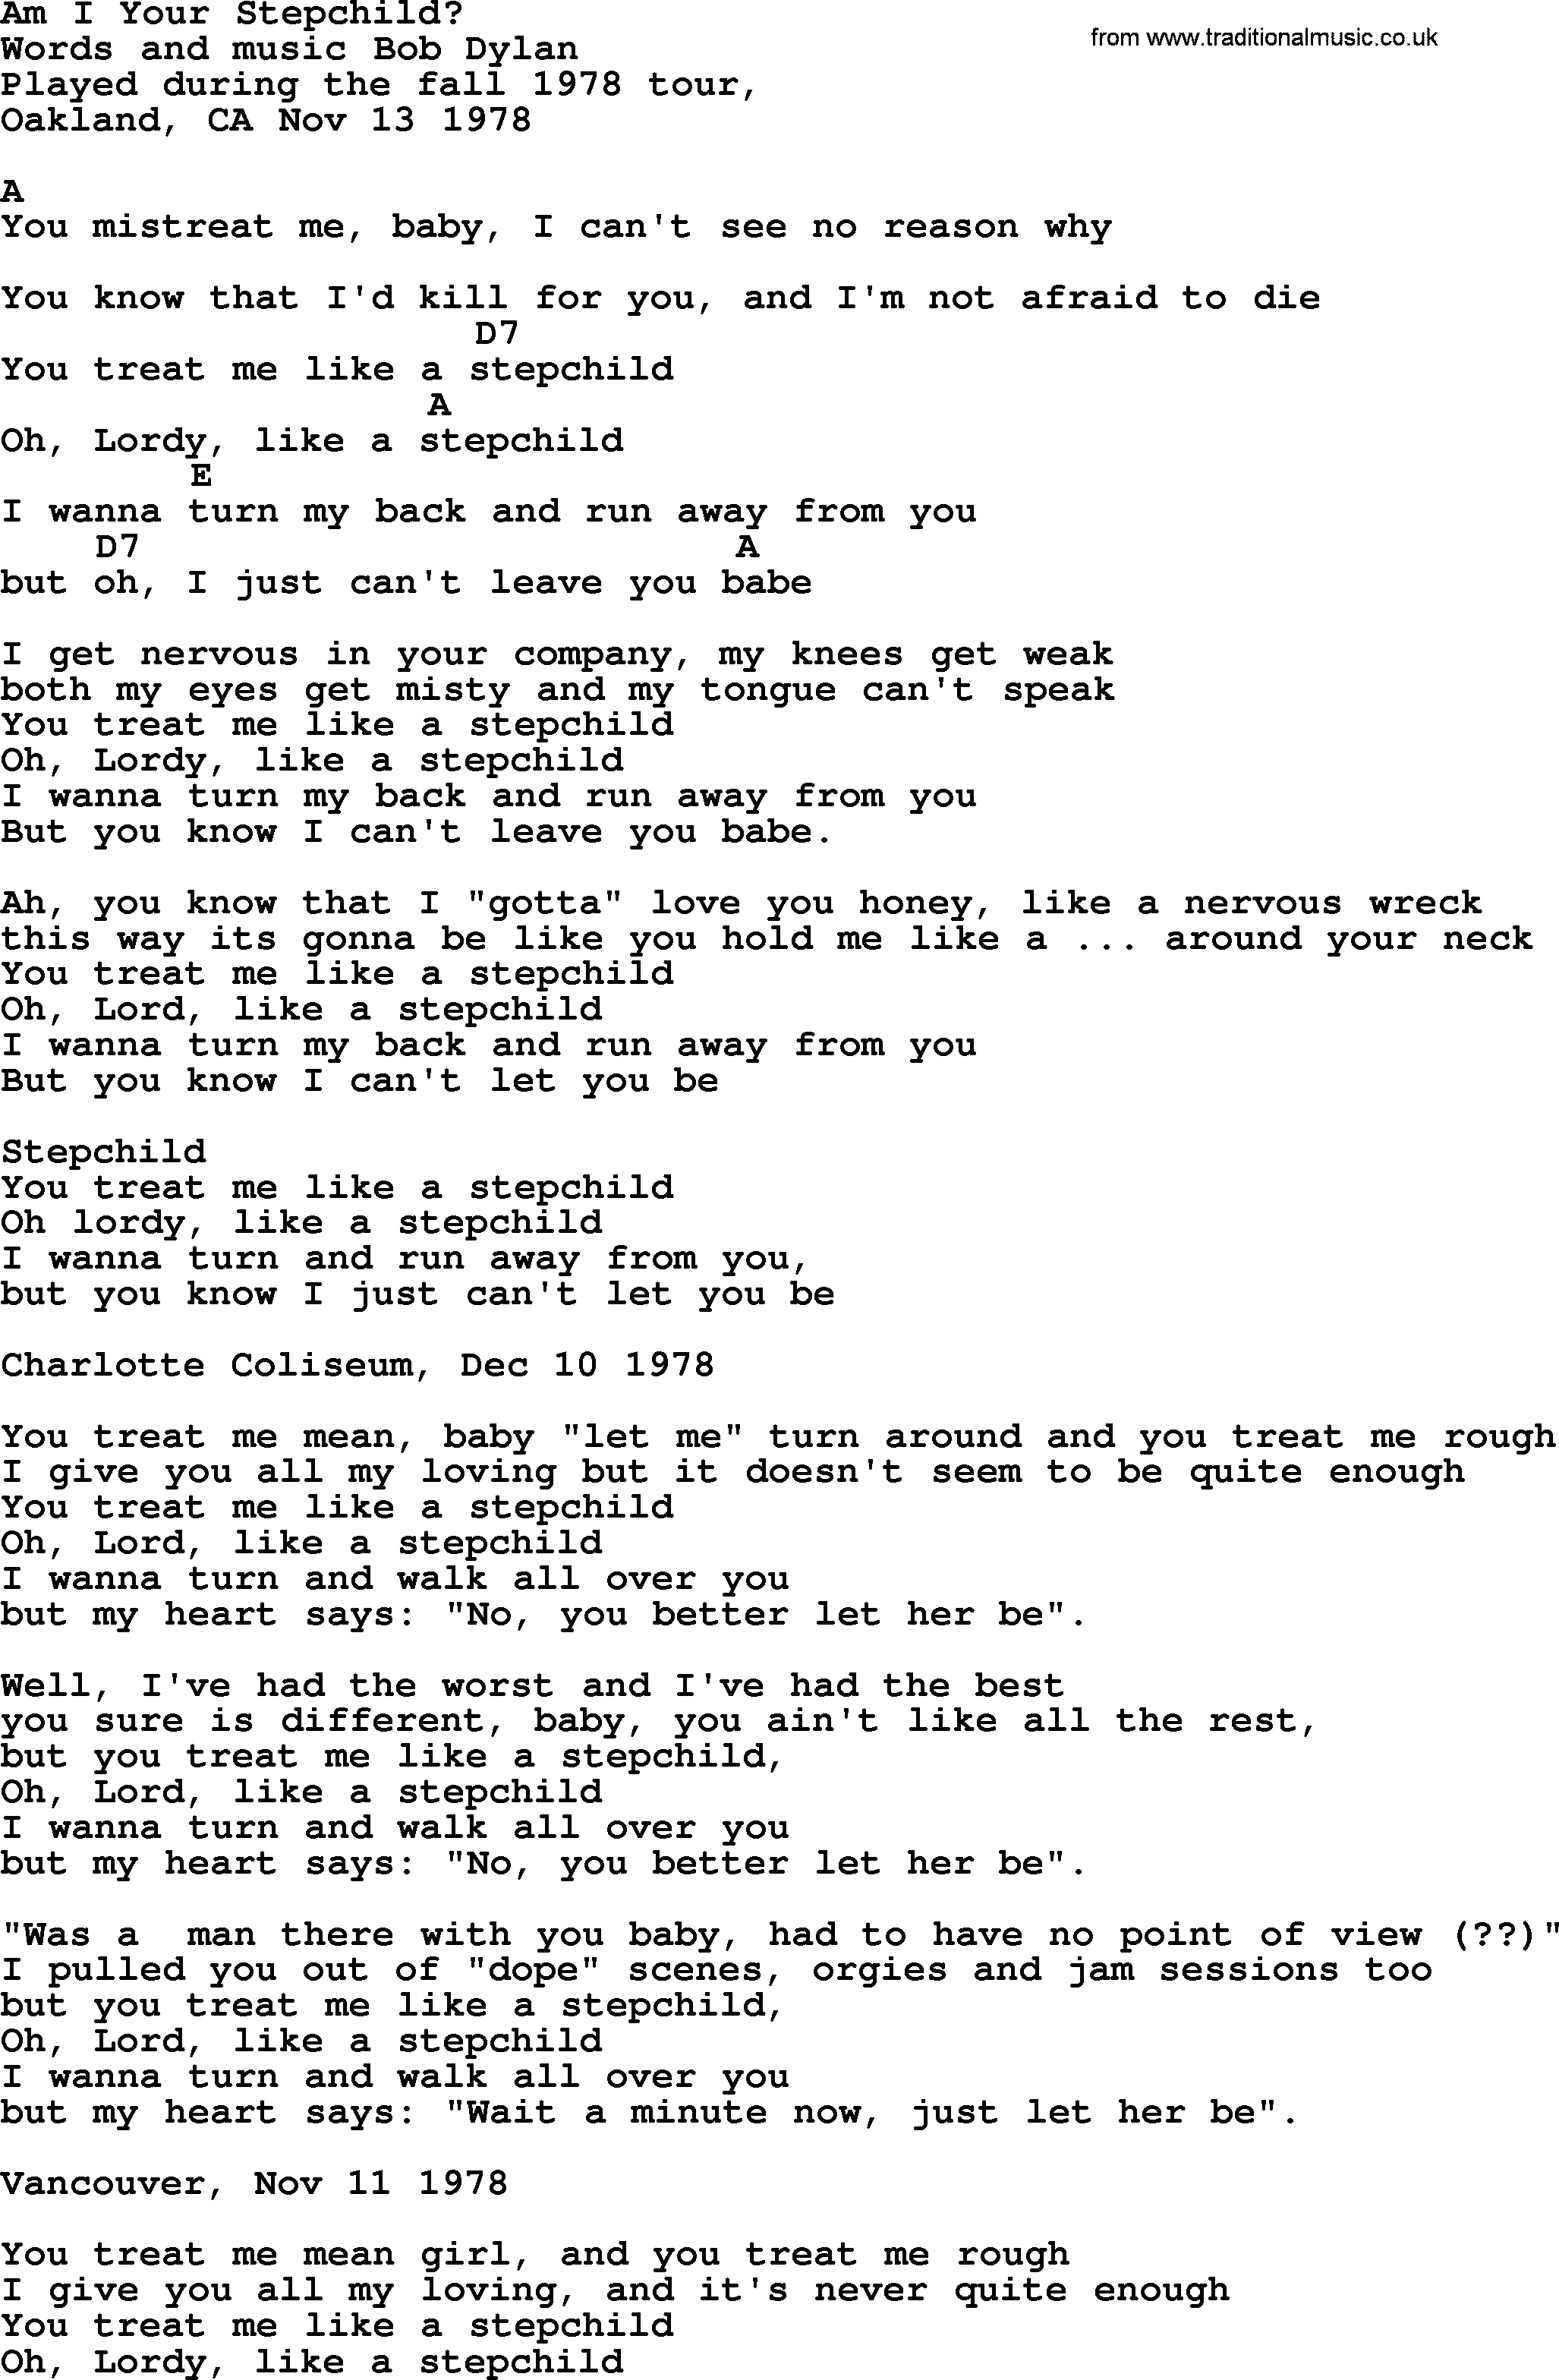 Bob Dylan song, lyrics with chords - Am I Your Stepchild